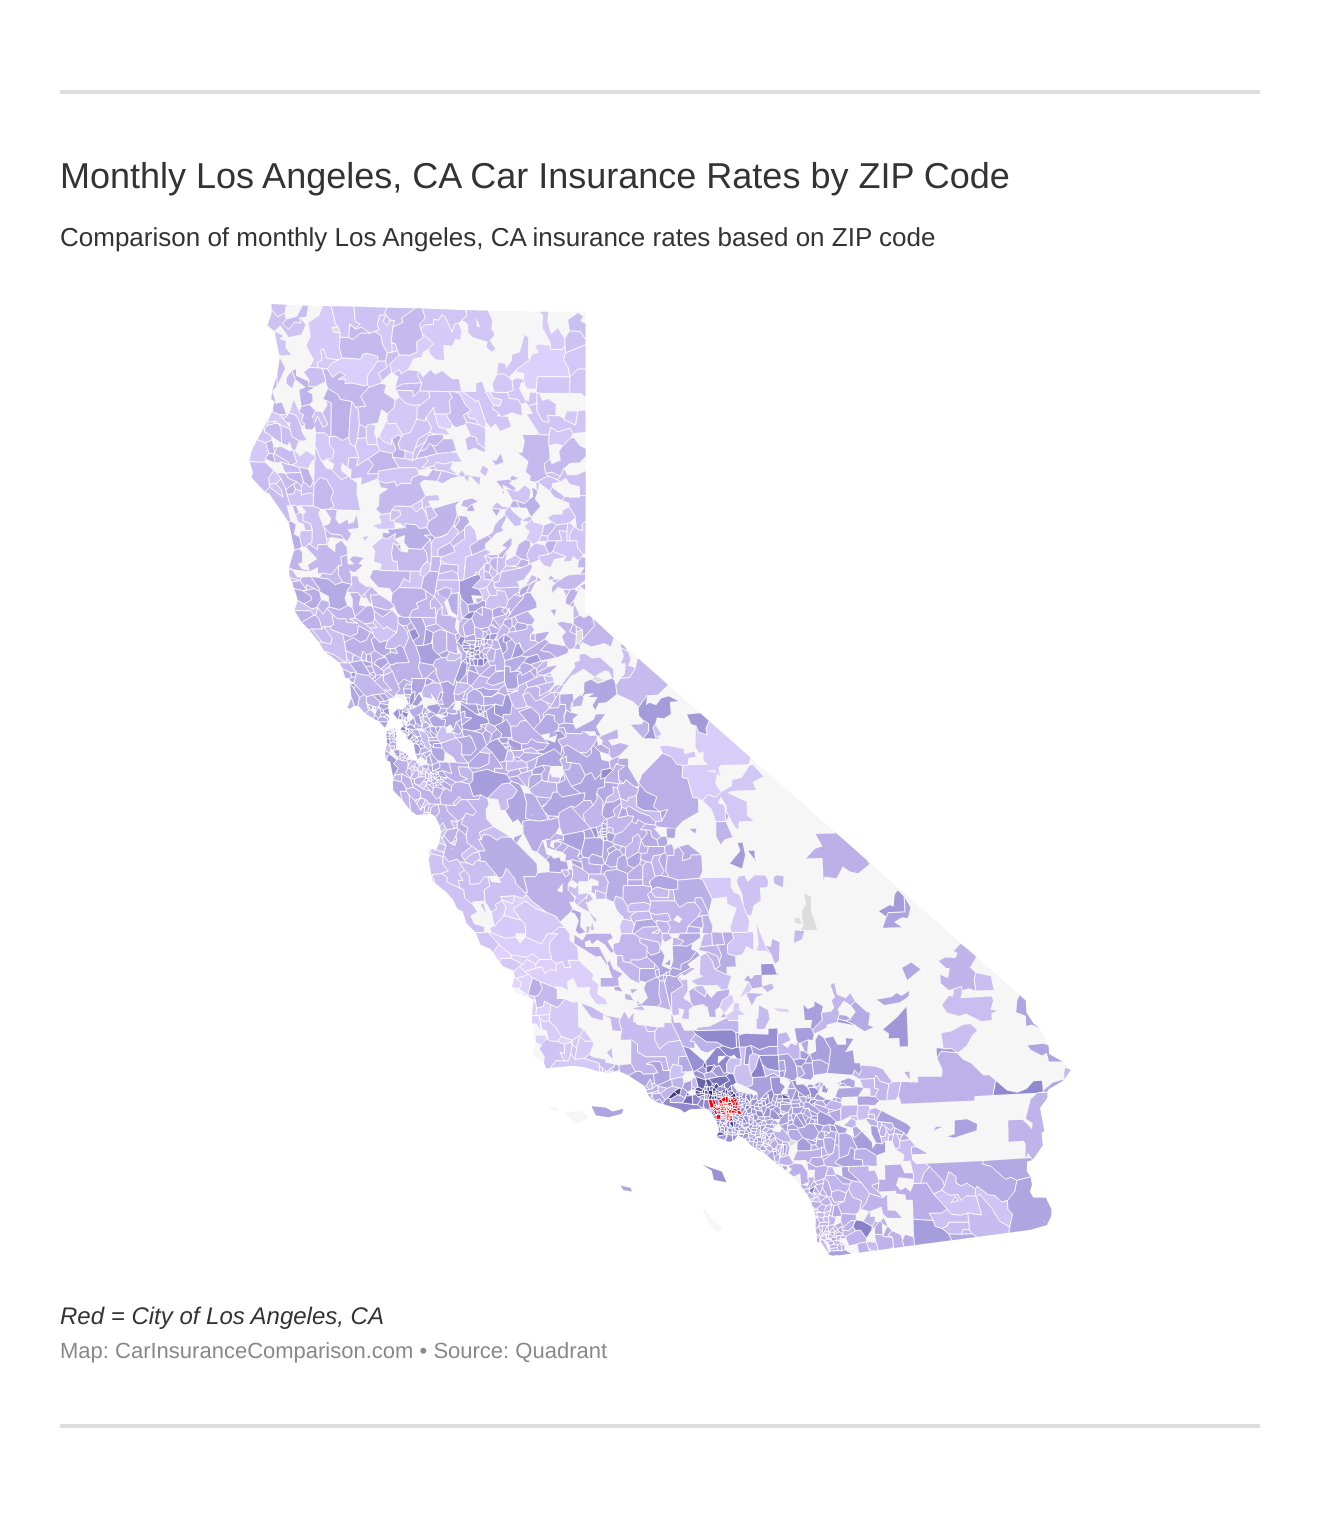 Monthly Los Angeles, CA Car Insurance Rates by ZIP Code